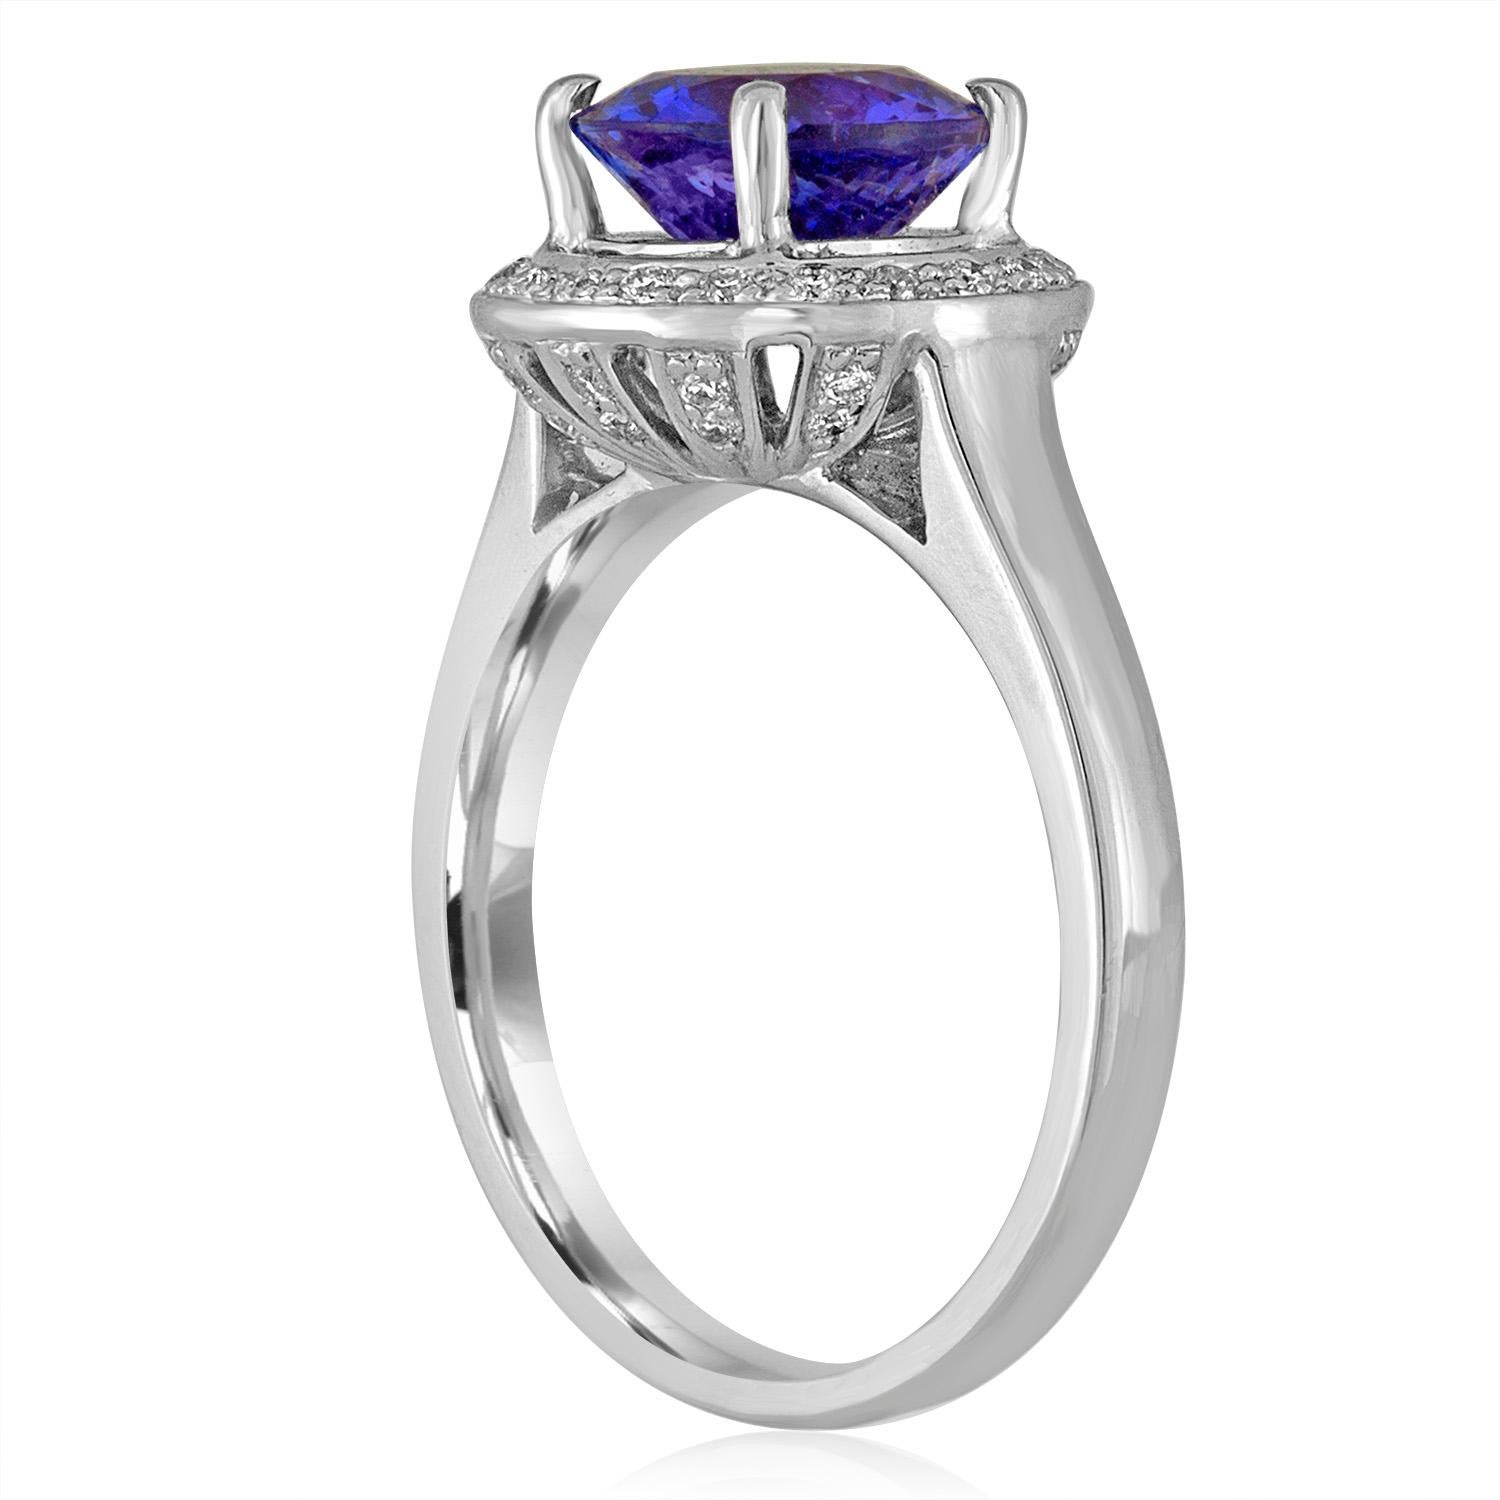 Stunning & Unusual Engagement Round Halo Ring
The ring is 18K White Gold.
The ring has 0.35 Carts in Diamonds F/G VS/SI
The center Stone is a Round Tanzanite 2.00 Carat
The ring is a size 6, sizable.
The ring weighs 5.5 grams